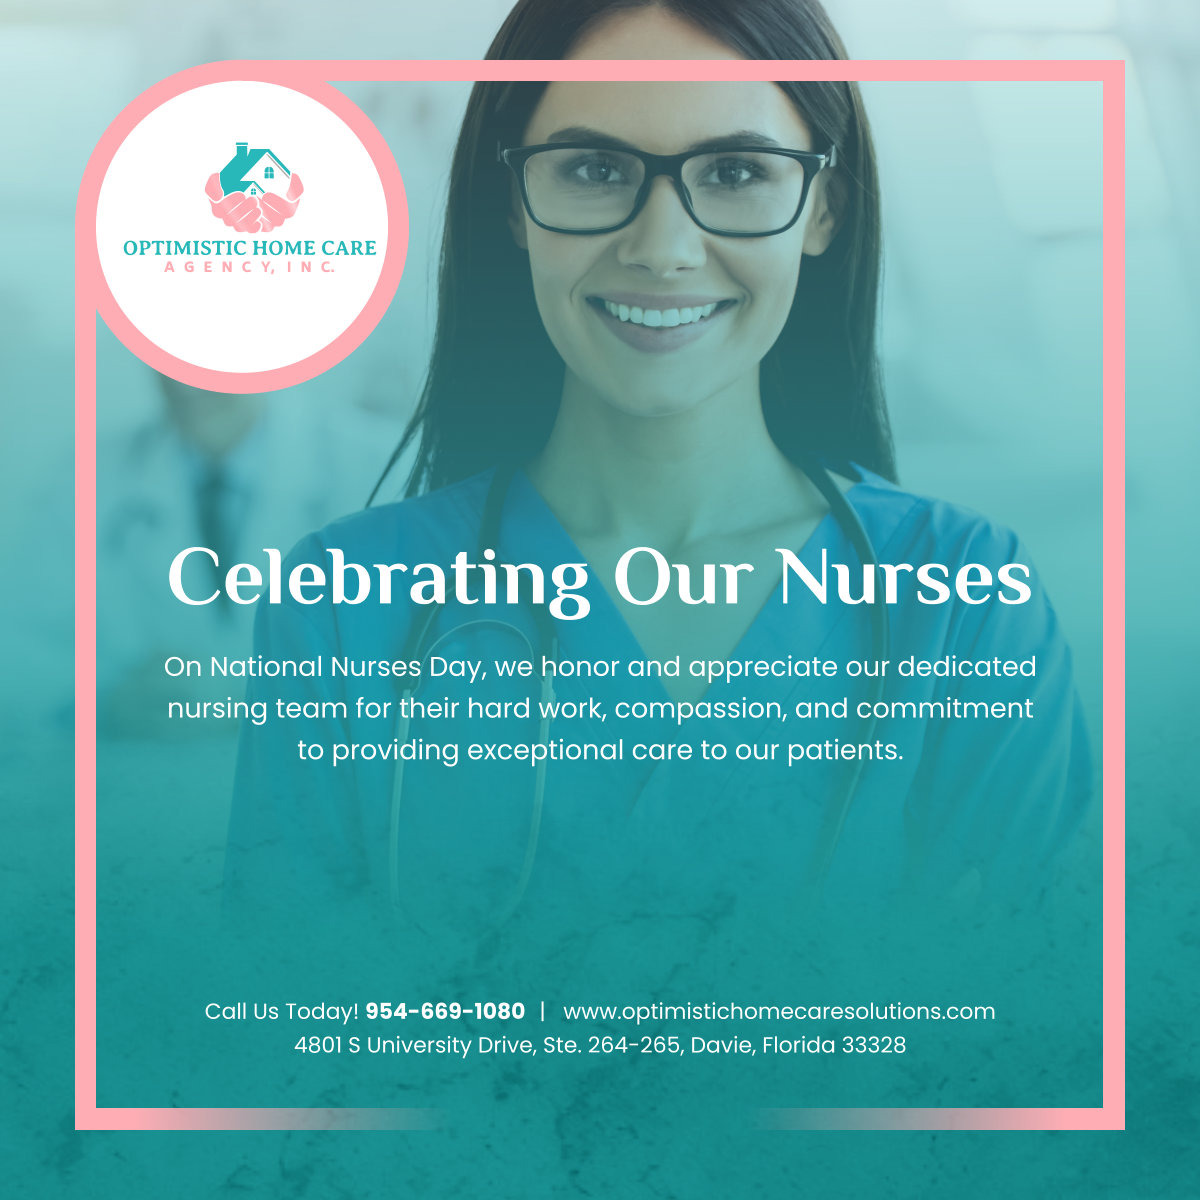 Join us in celebrating the incredible contributions of our nurses on National Nurses Day. Thank you for all you do! 

#HomeHealthCare #DavieFL #NationalNursesDay #Nurses #HealthcareProfessionals